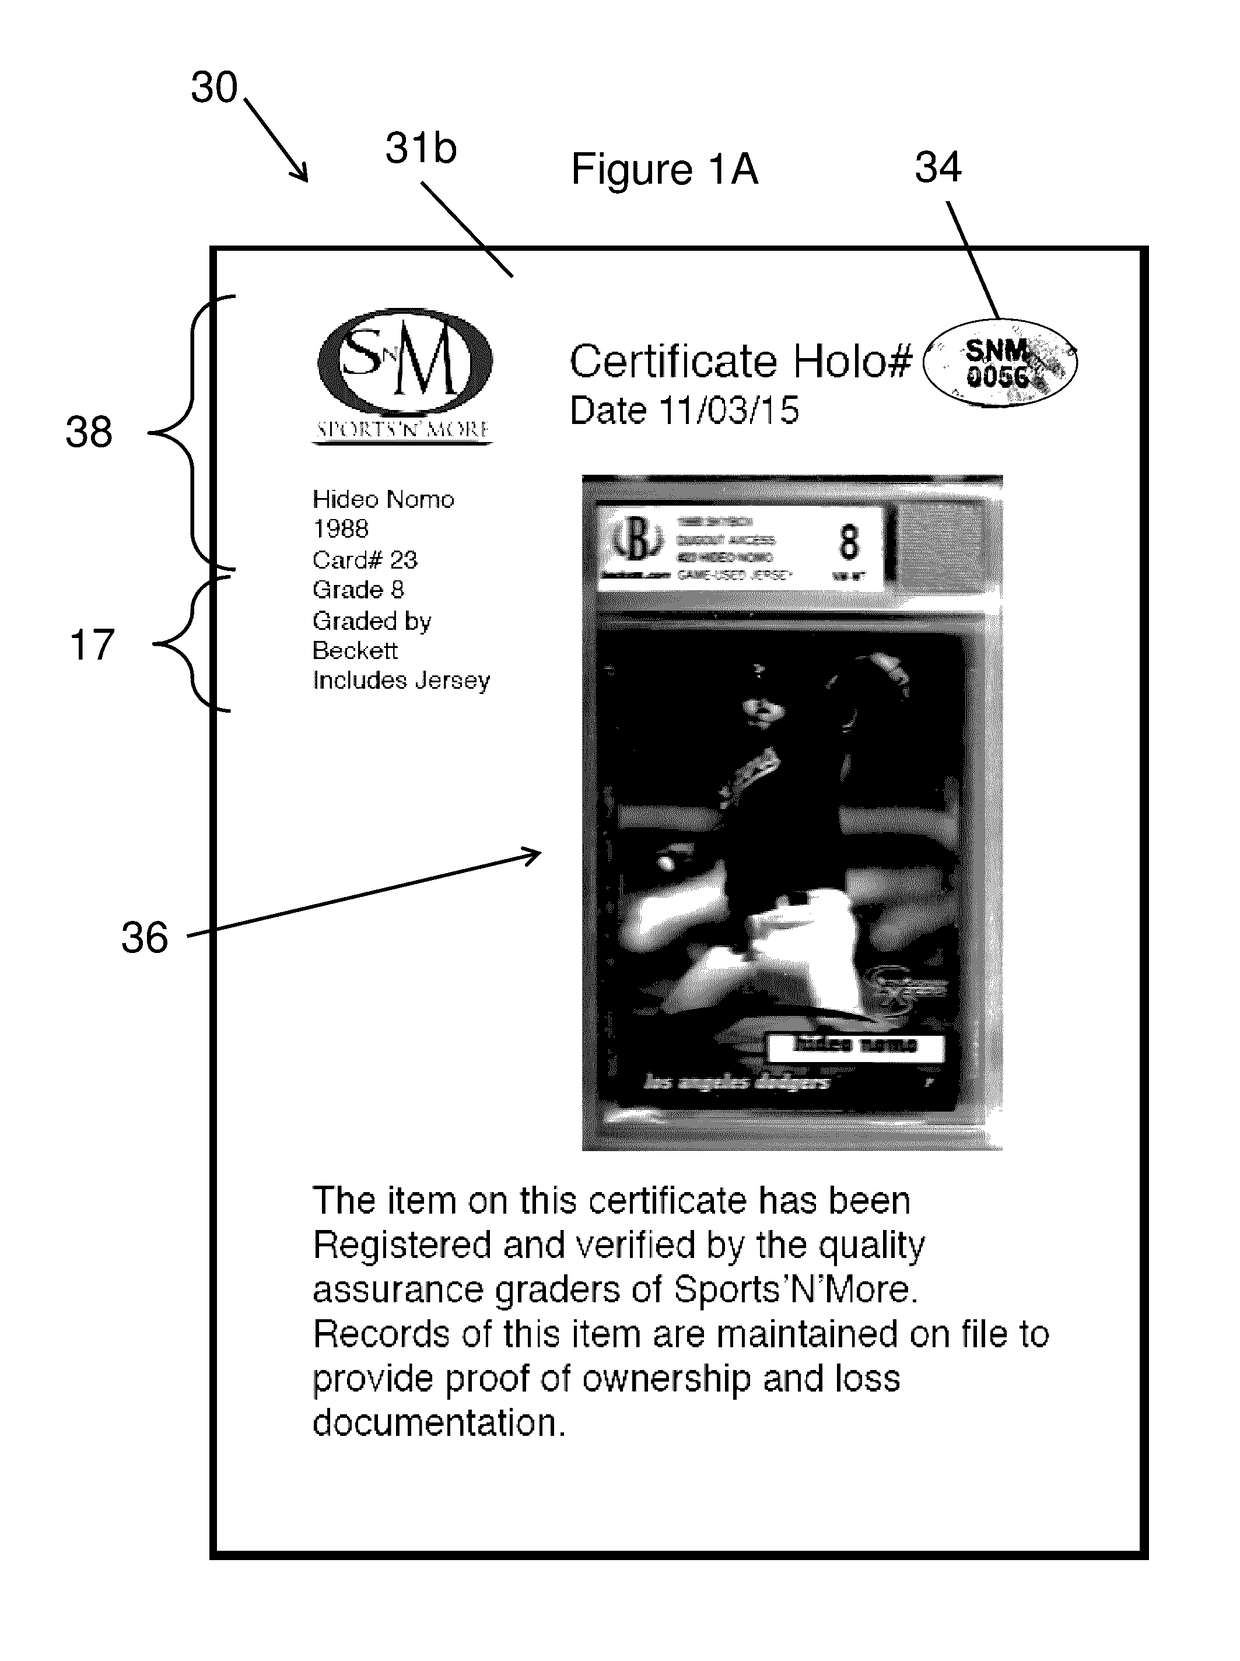 Collectable item condition certification system